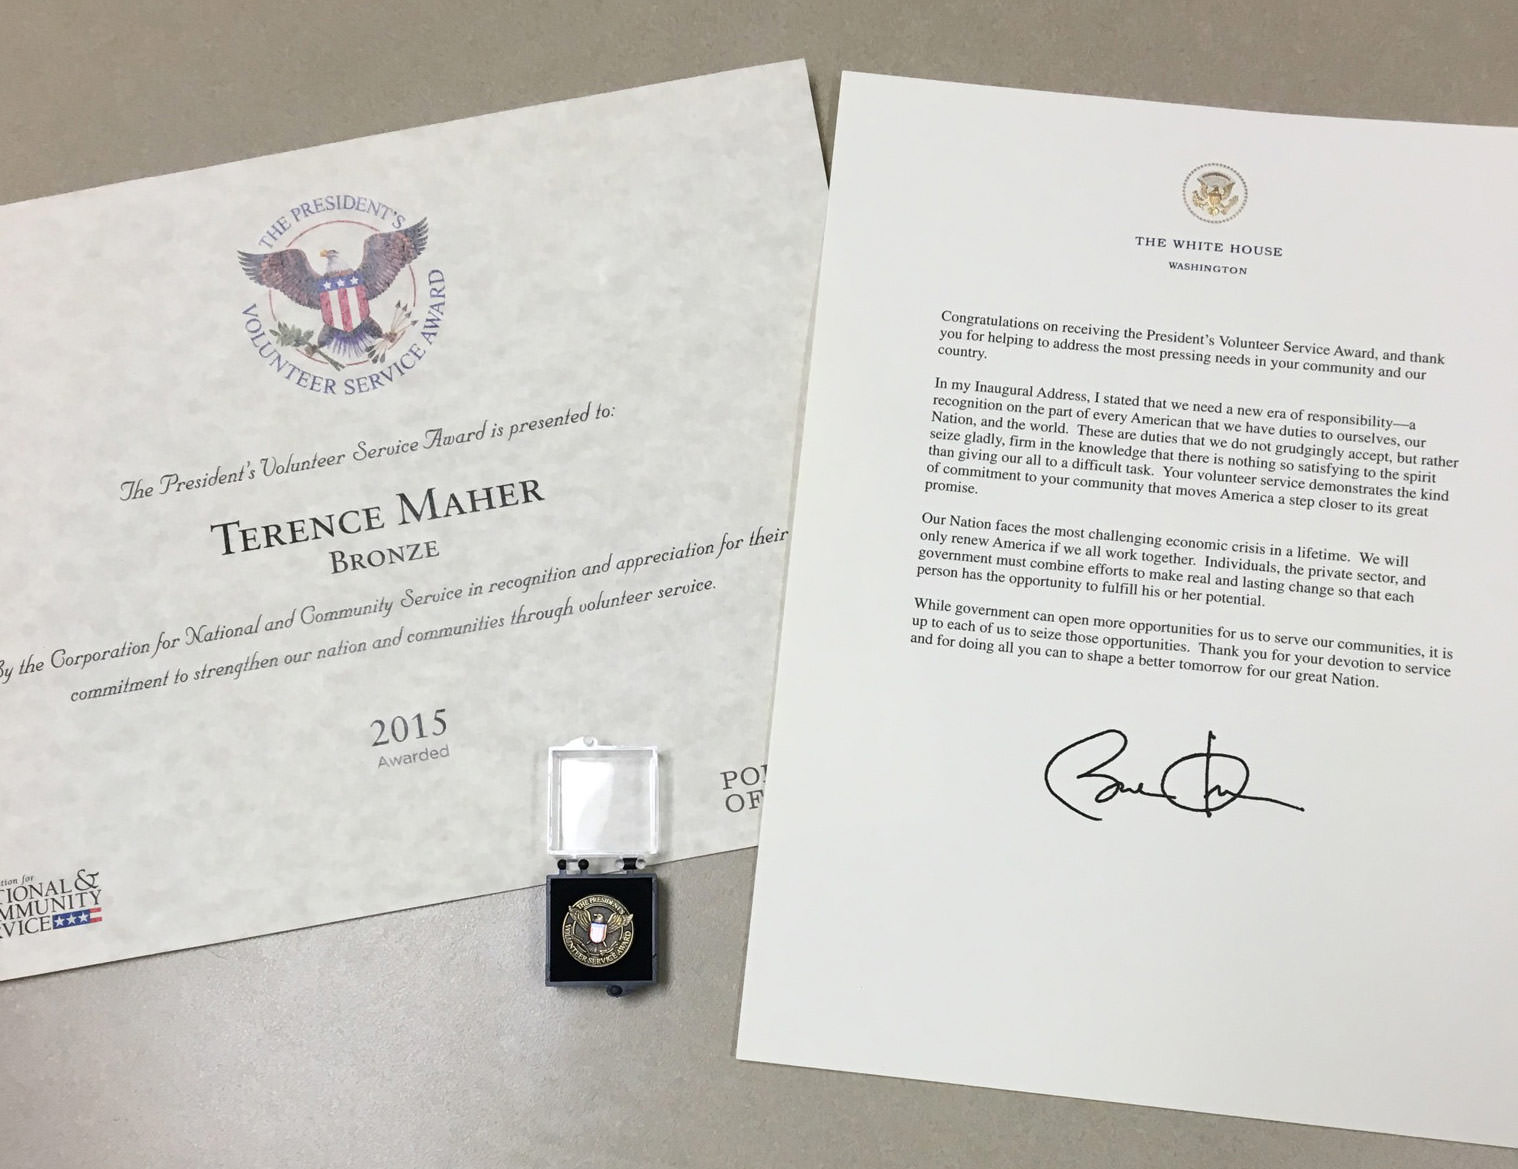 A photo of Terrence's award, medal and congratulatory letter from President Barack Obama.